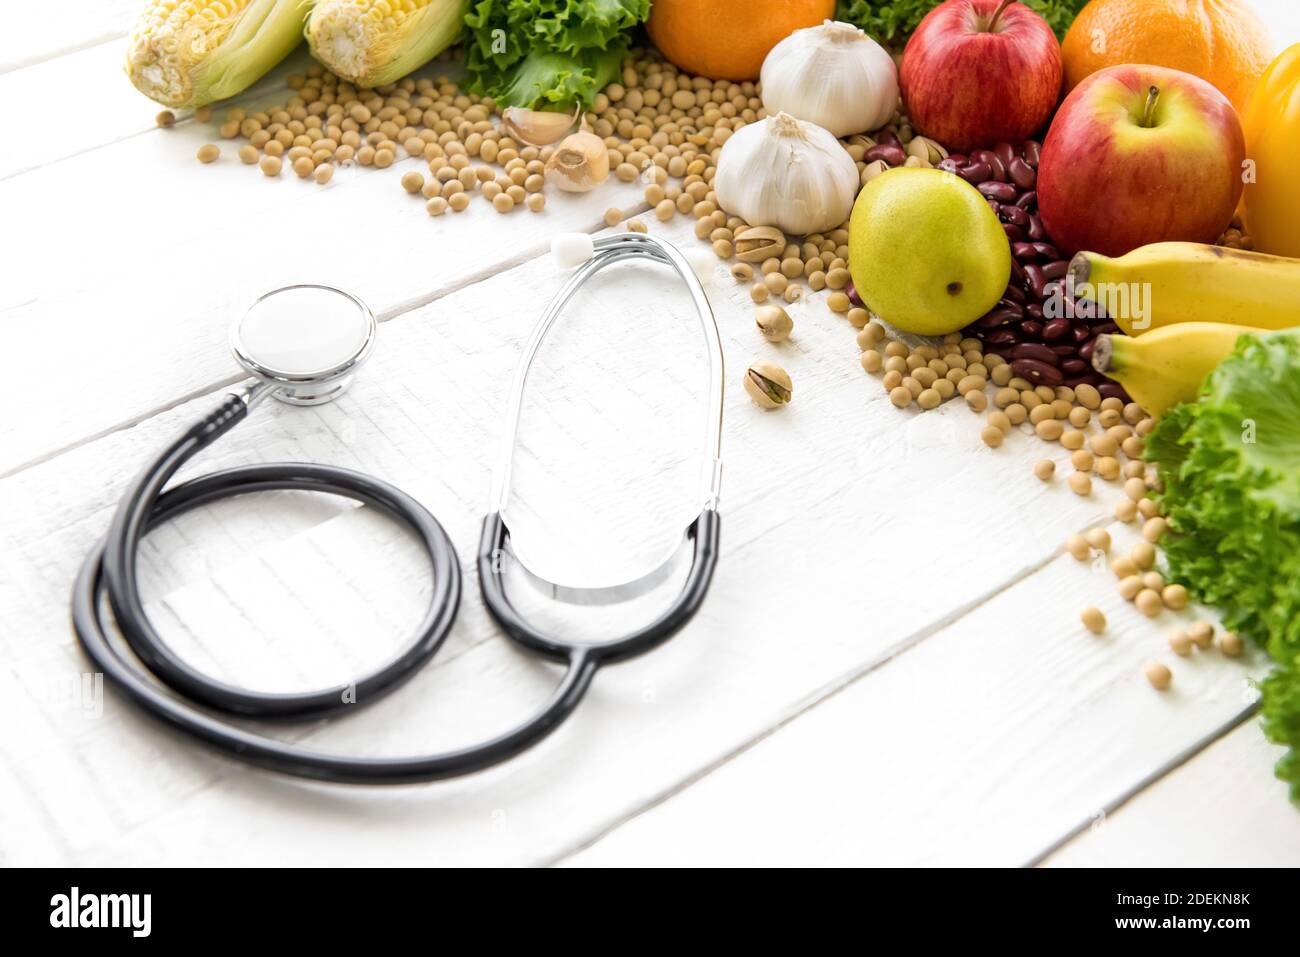 Medicinal and healthy food, mixed fruits and nuts, with stethoscope on white wood table Stock Photo